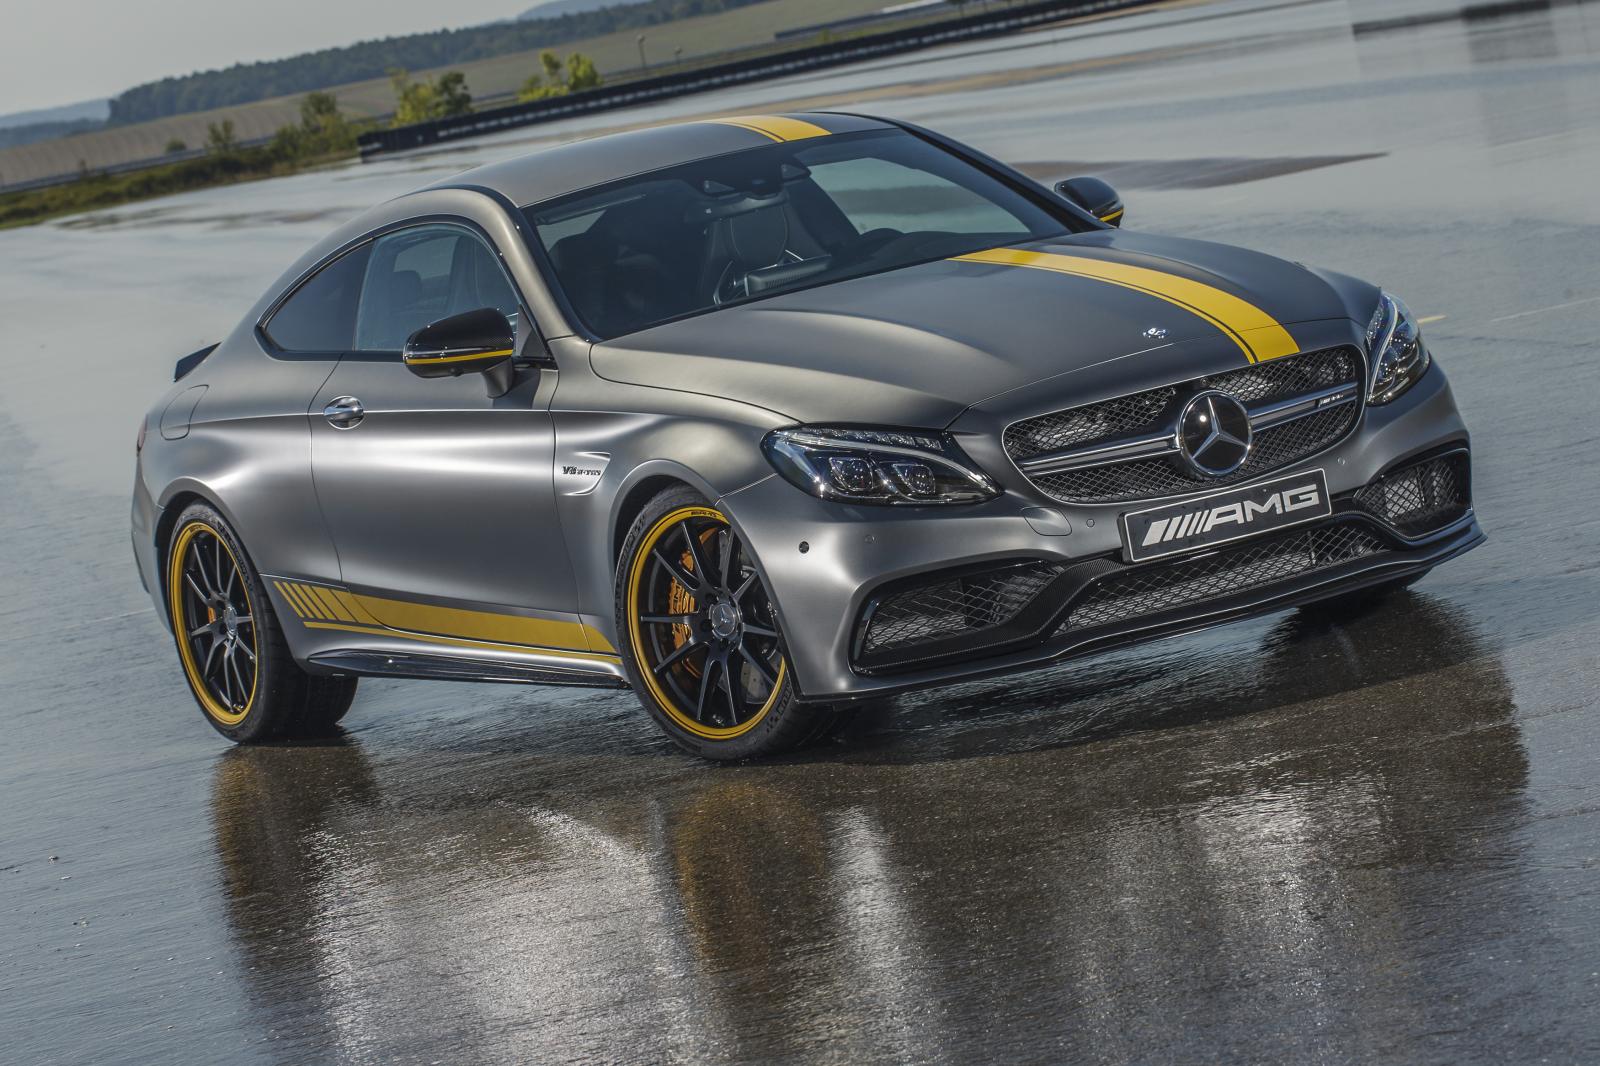 MERCEDES AMG C63 COUPE EDITION 1 RESM GALERS